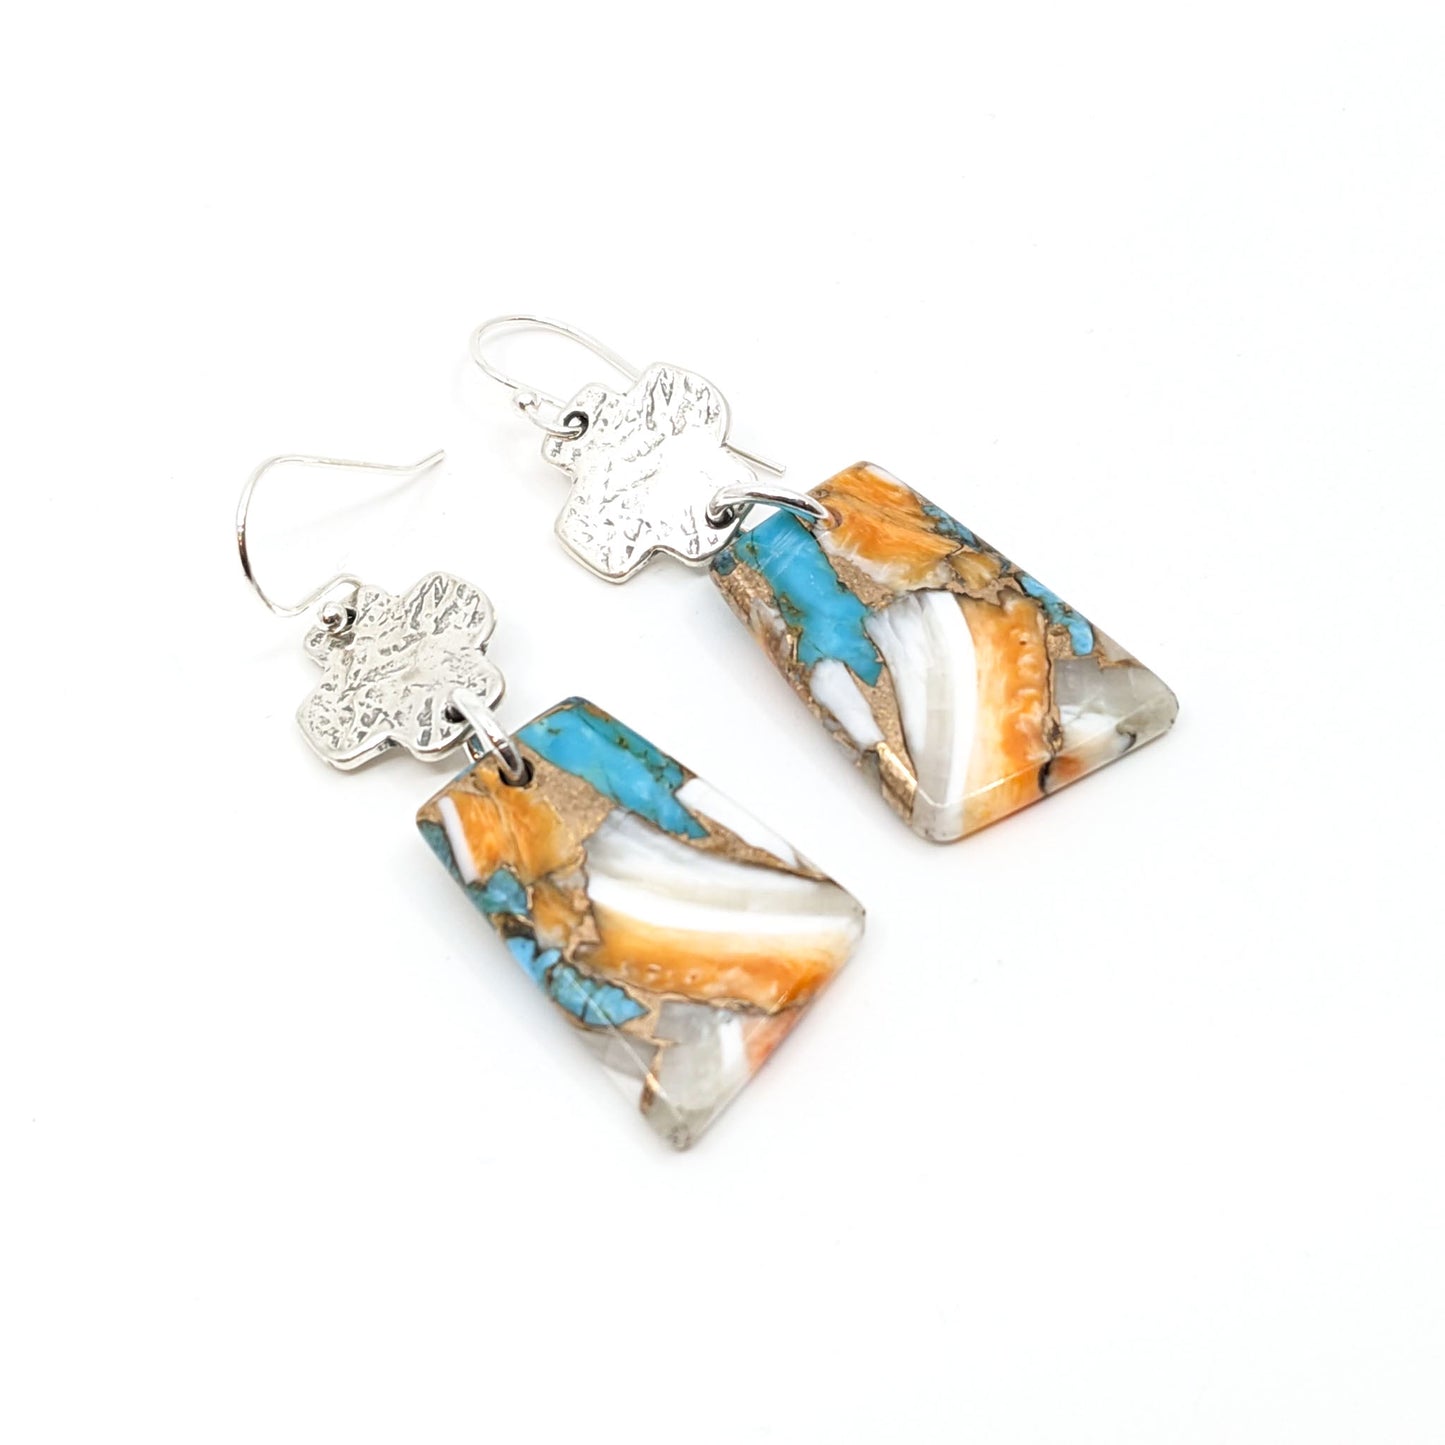 Small Earrings with Large Stone Slab-RKE-16